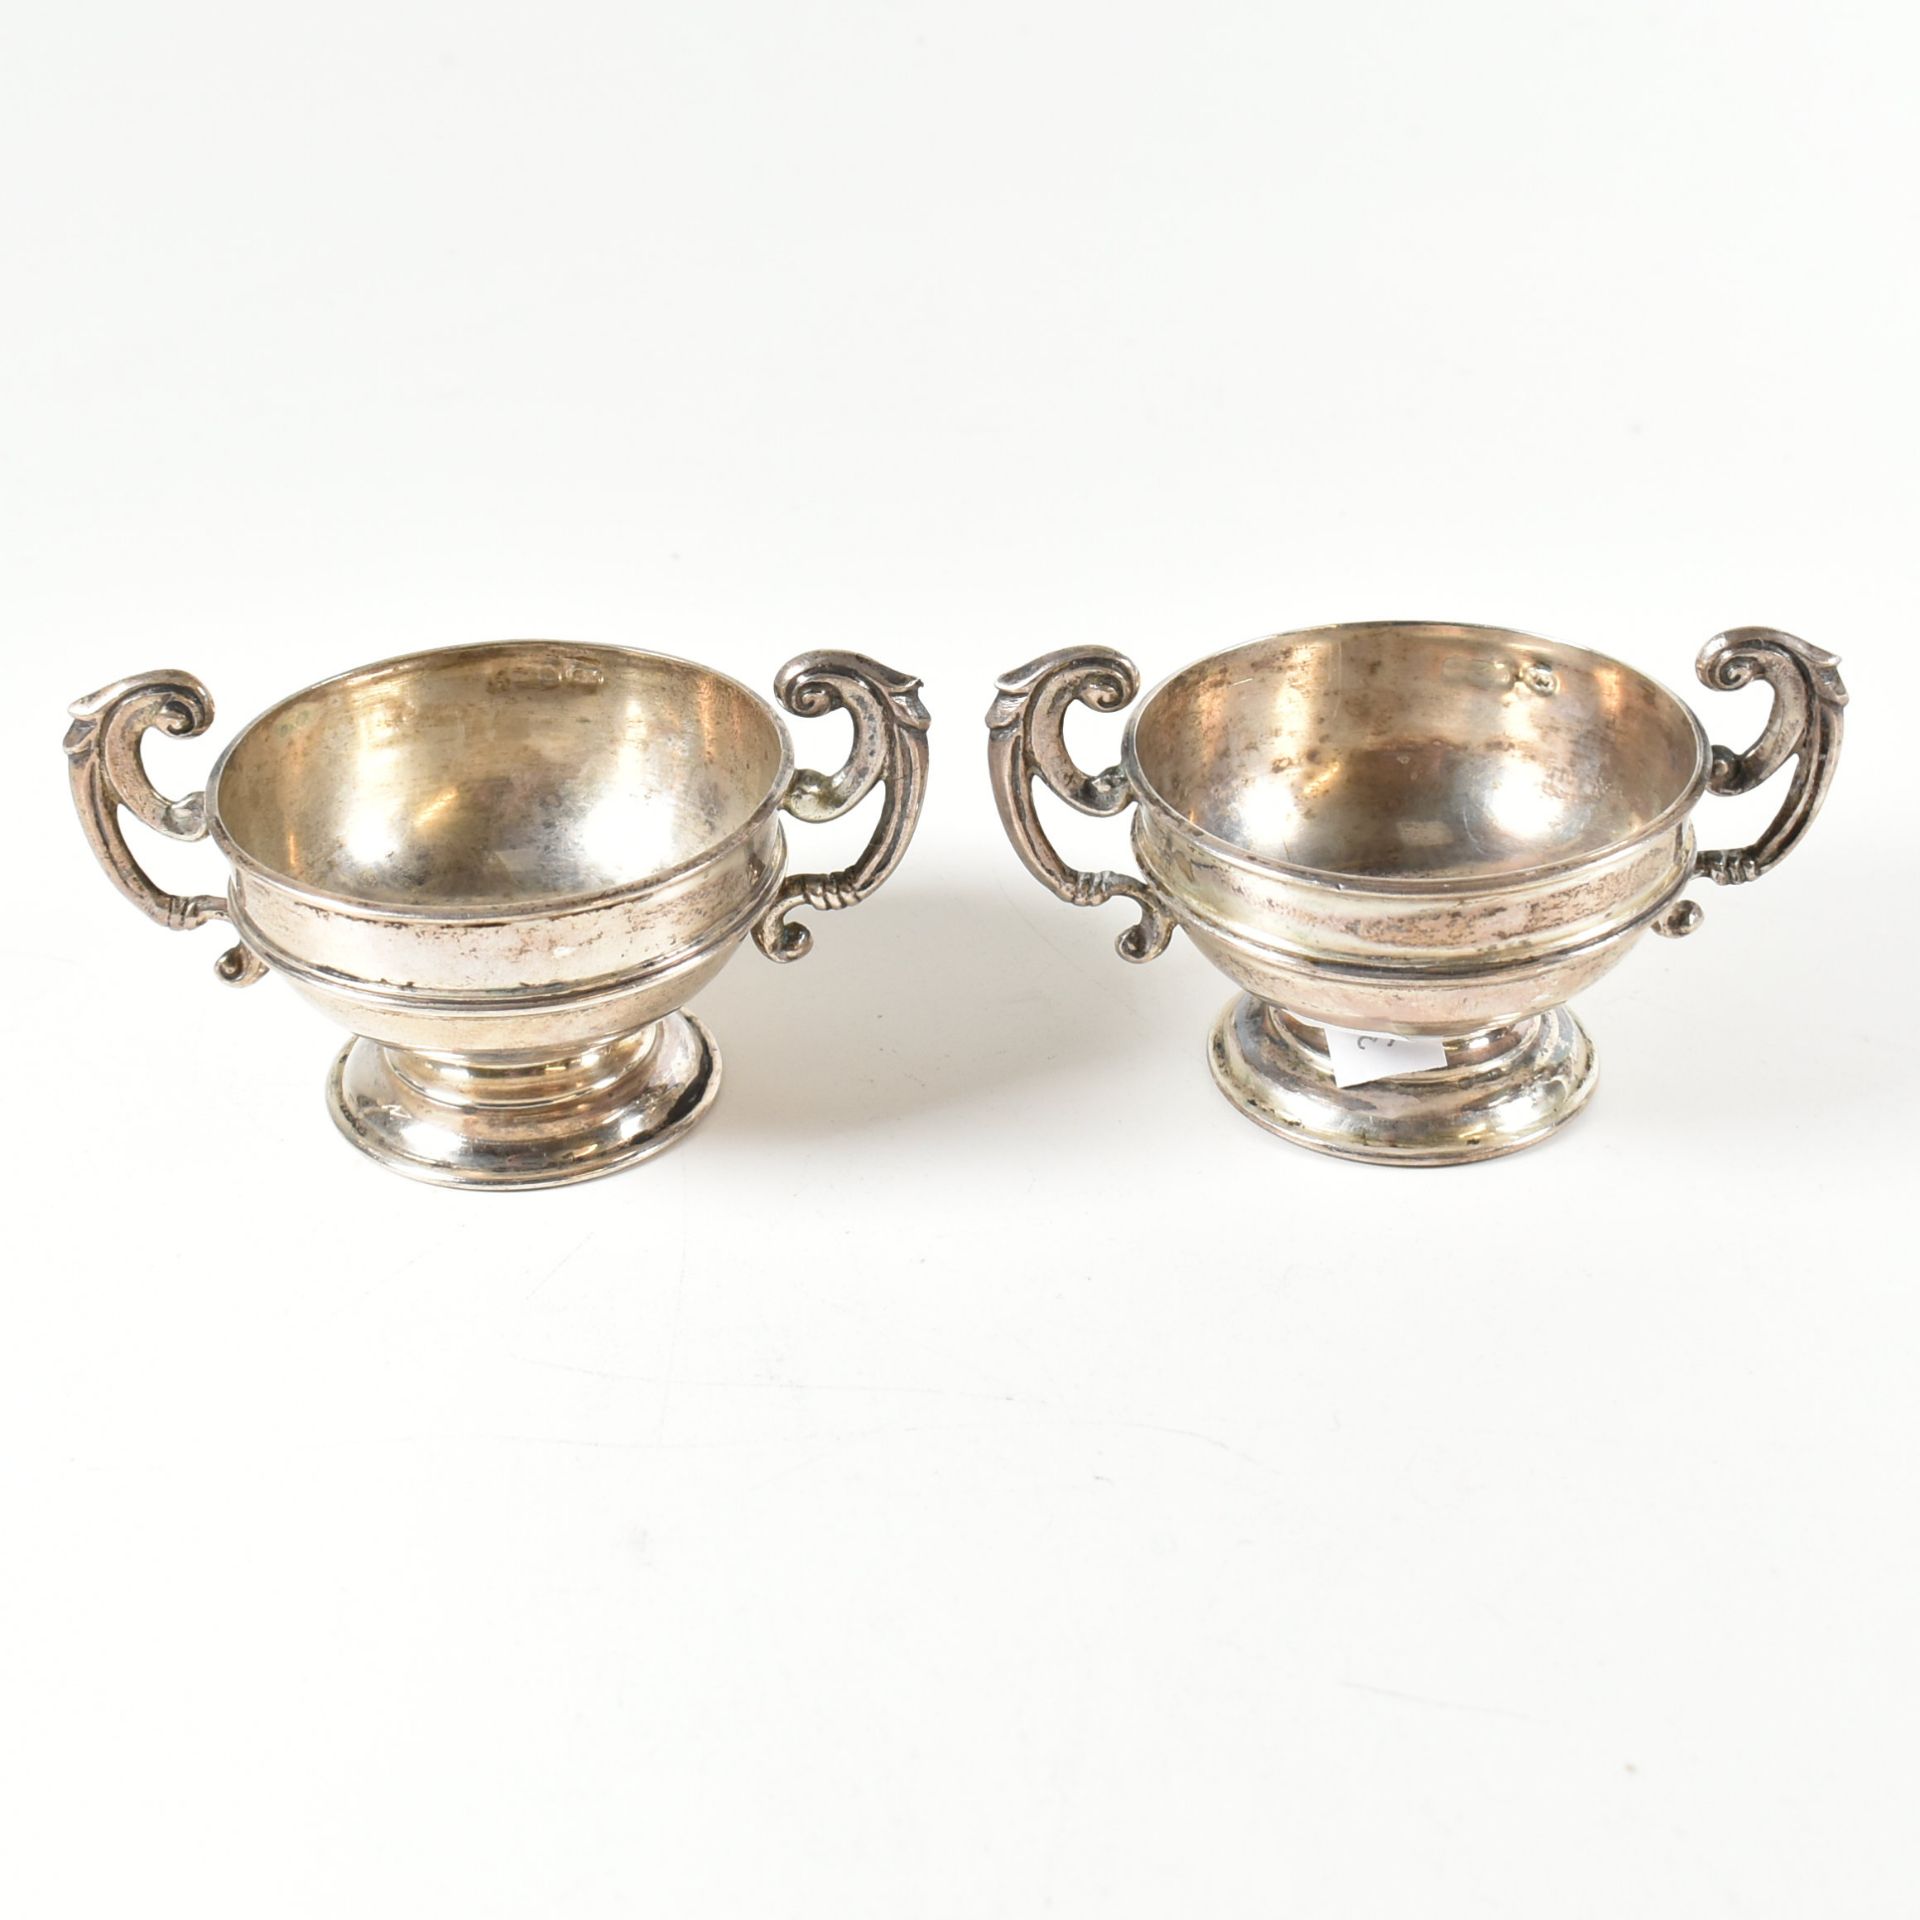 PAIR OF LATE VICTORIAN HALLMARKED SILVER SALTS CHARLES HORNER - Image 2 of 9